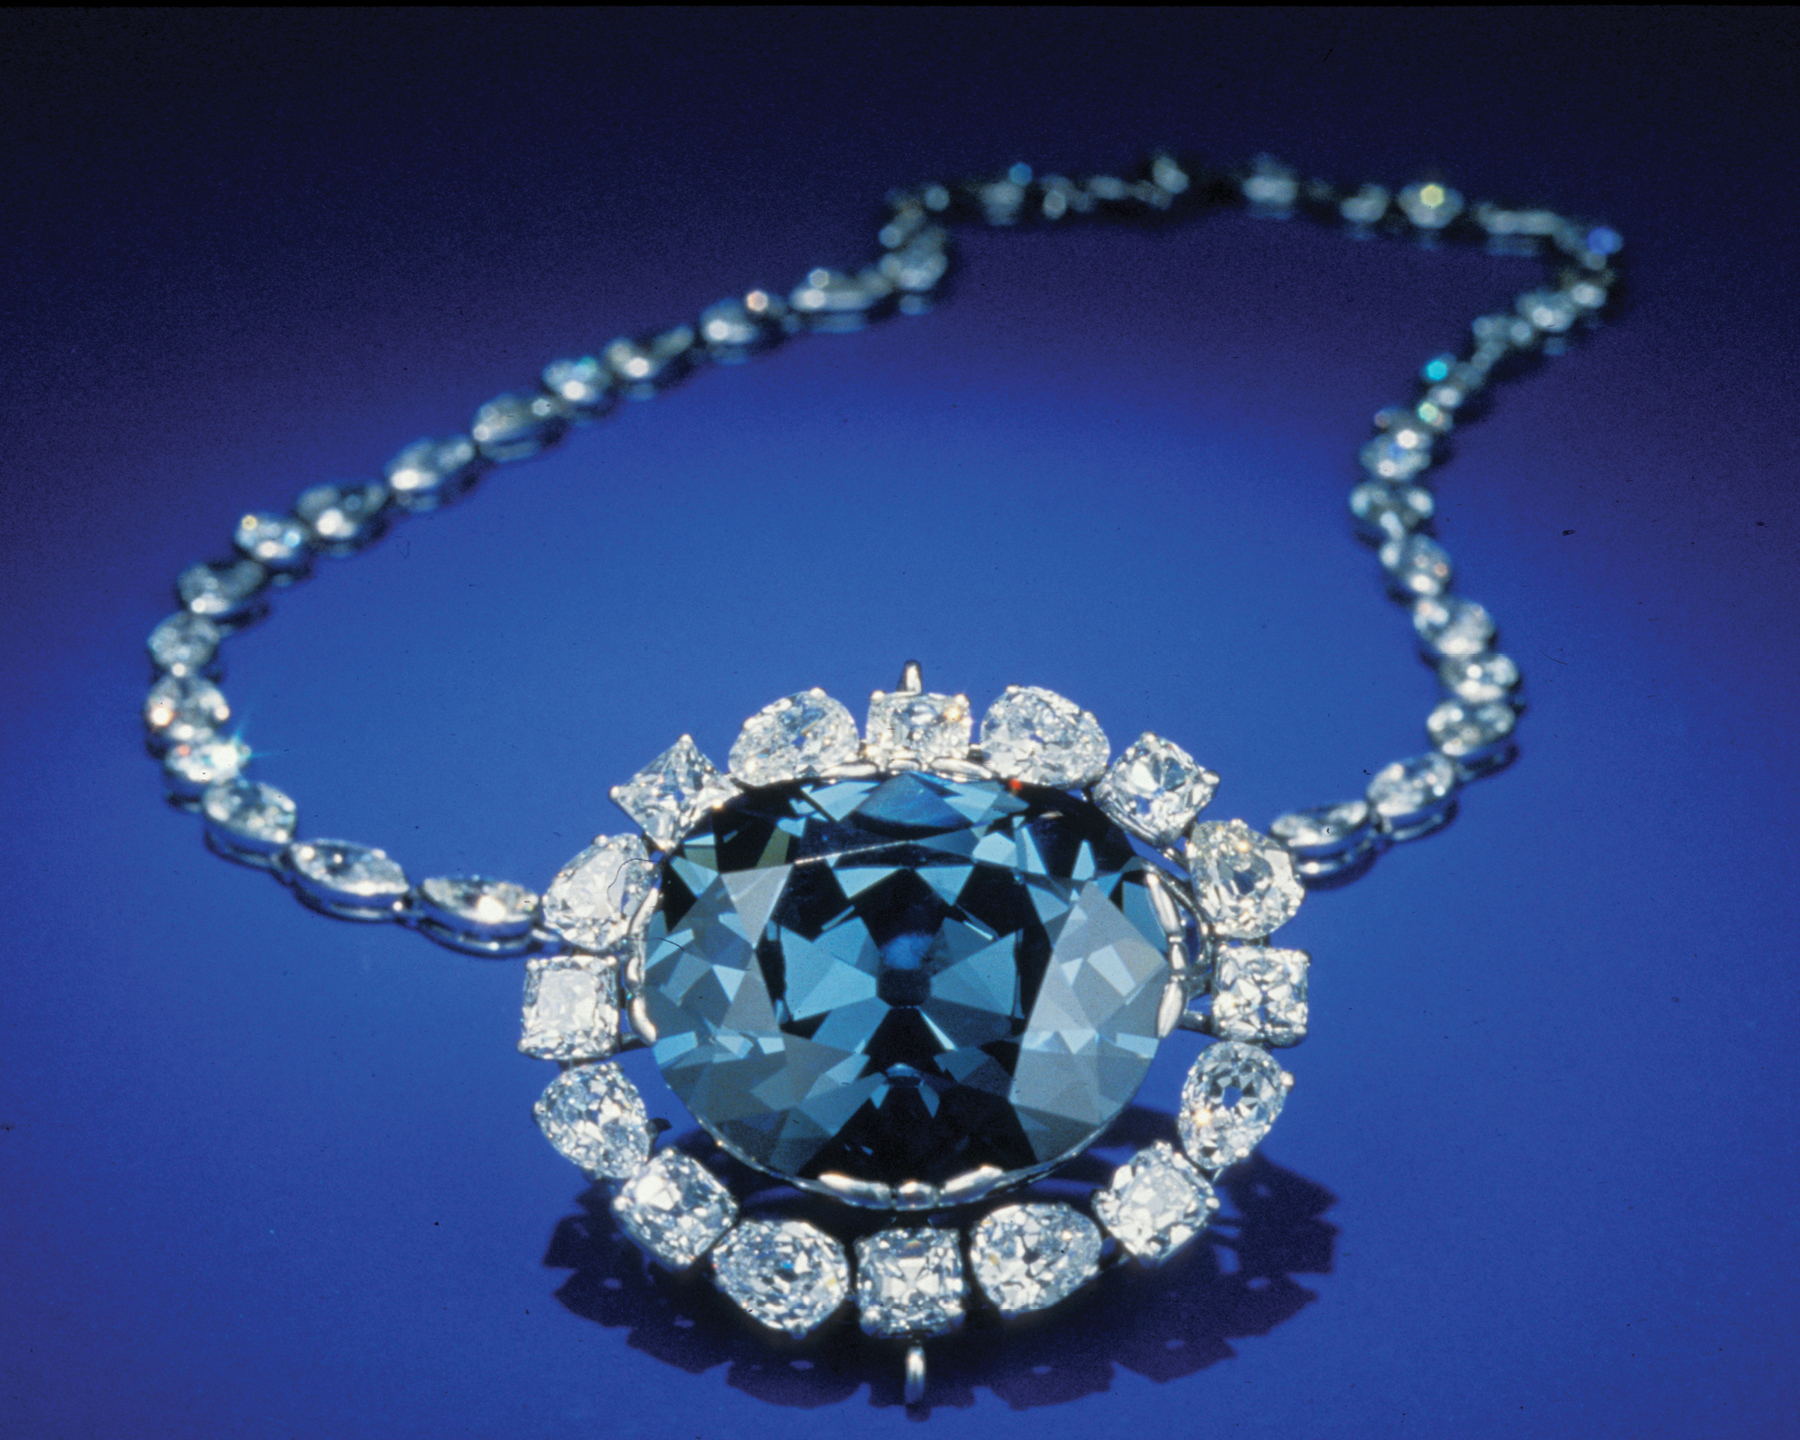 The Cursed History and Science Behind The Hope Diamond